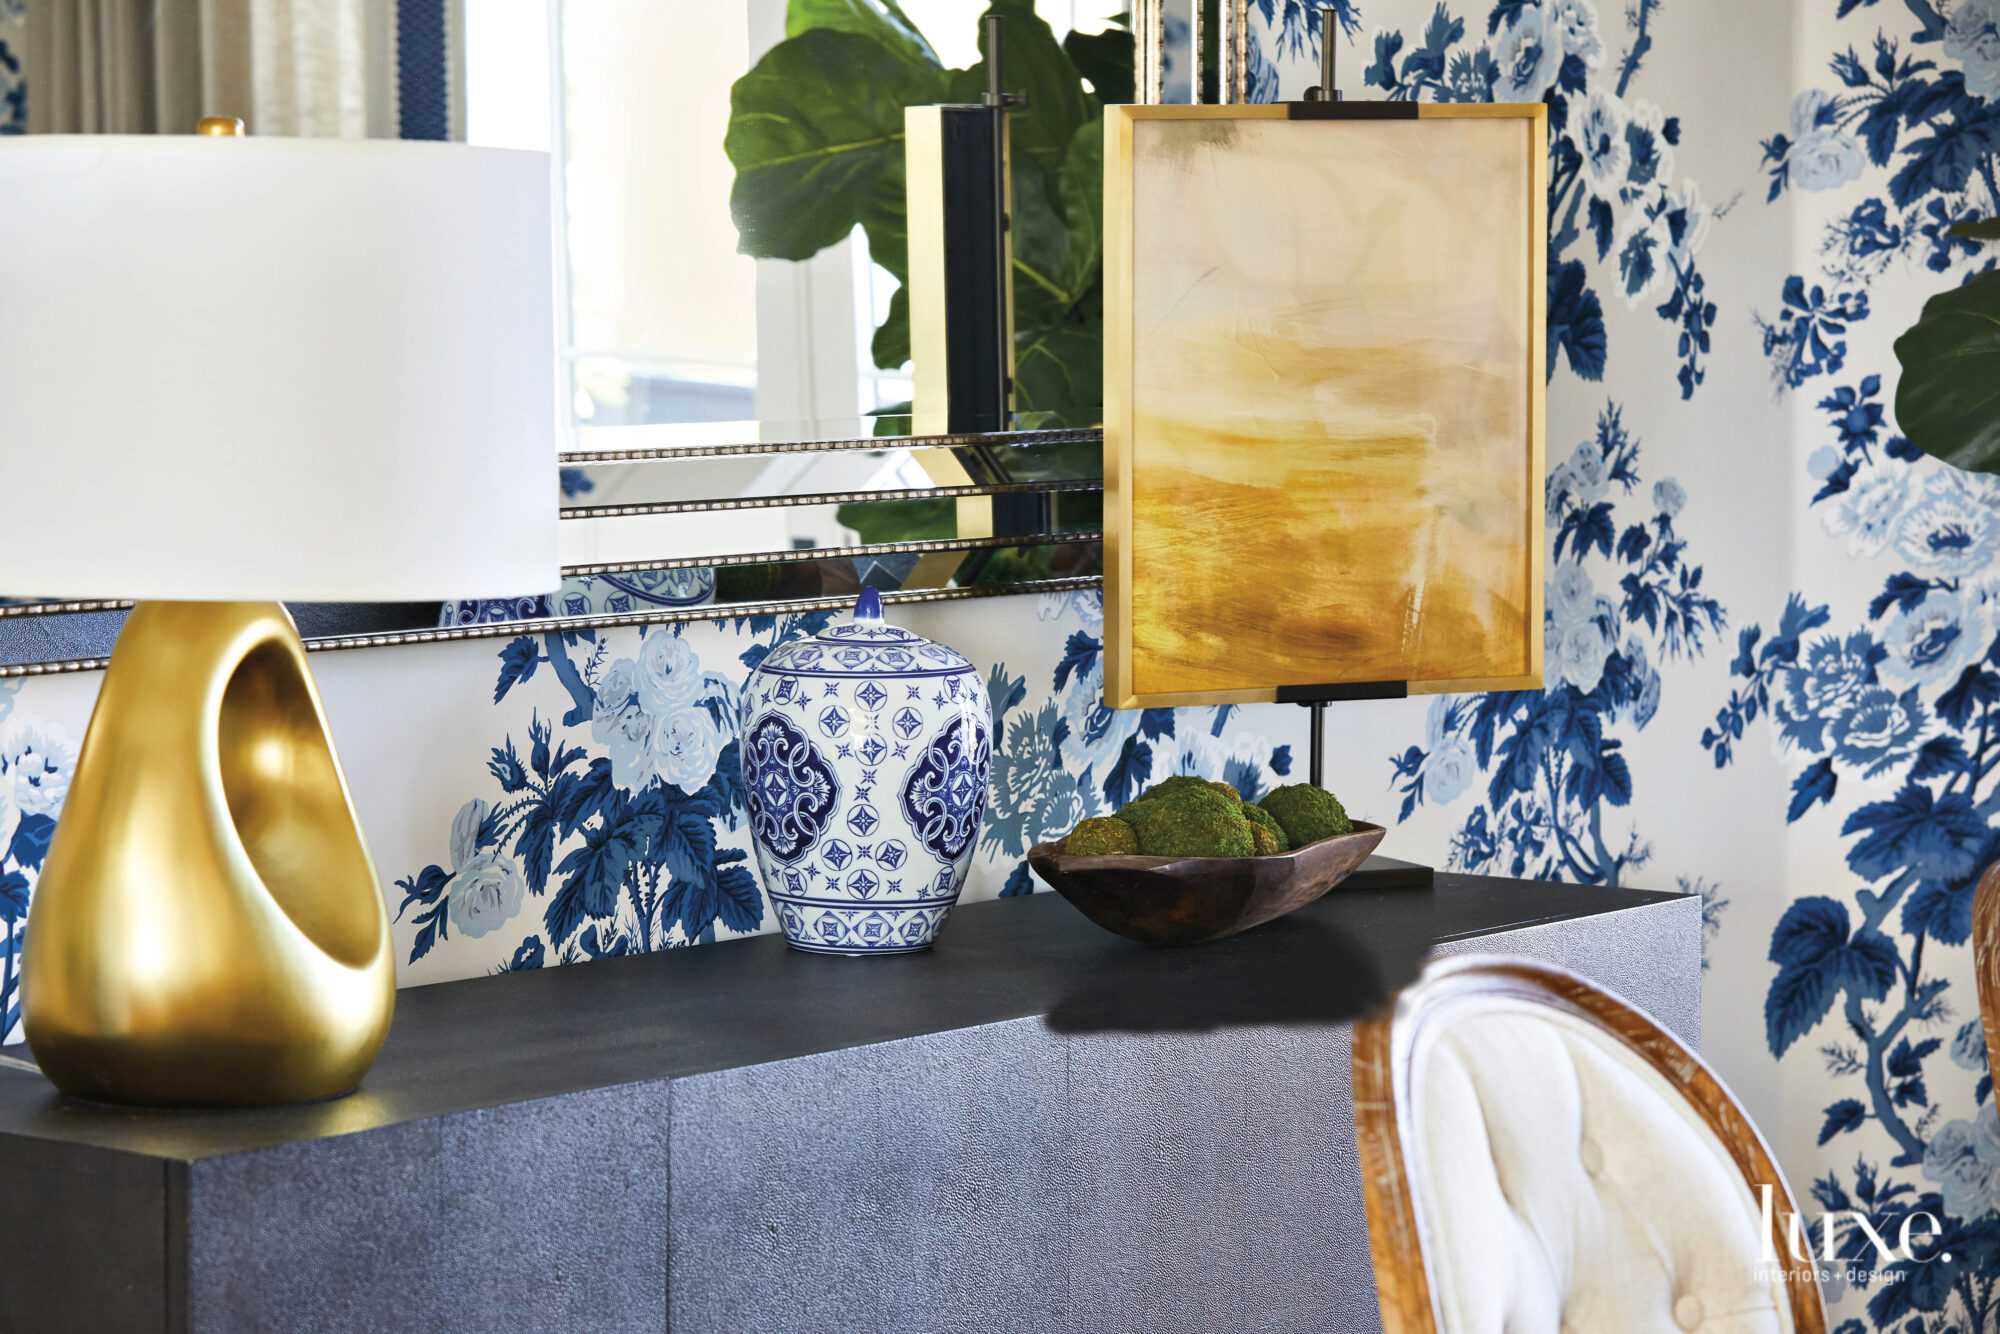 A vignette in the dining room with Chinoiserie-style porcelain and blue-and-white floral wallpaper.